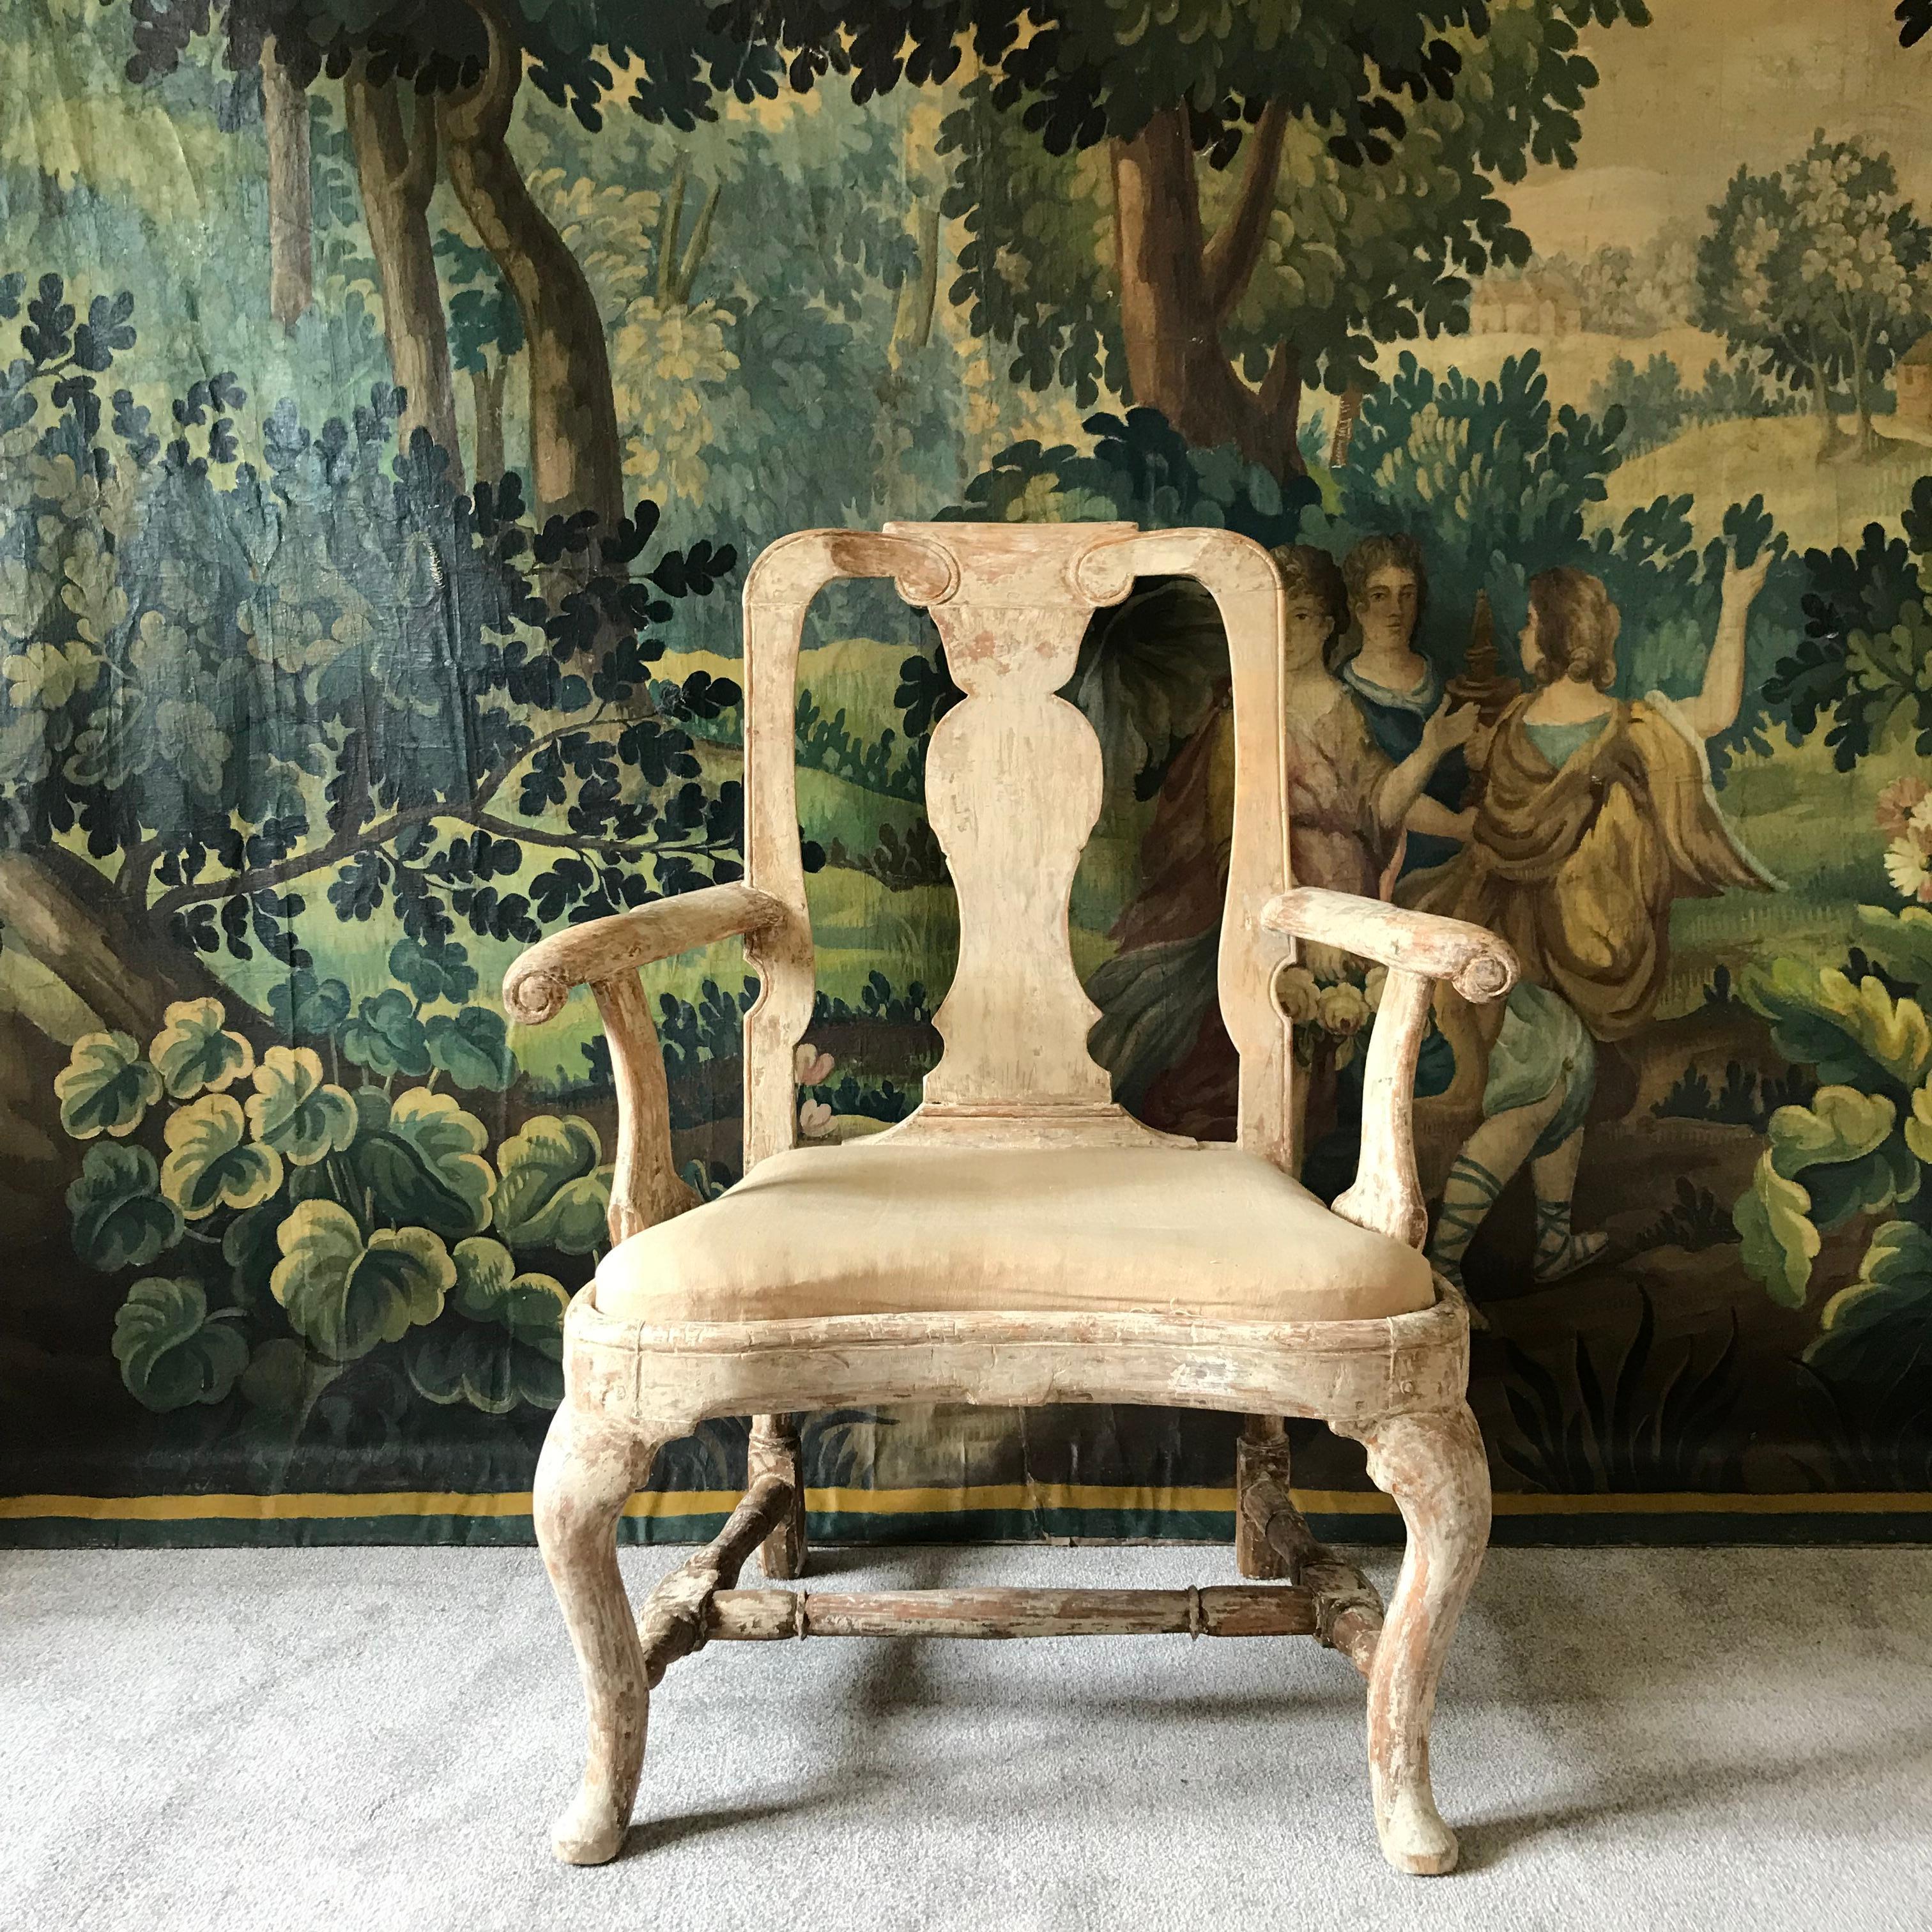 A very beautiful 18th century Swedish period rococo armchair which has been carefully dry scraped back to its  original pale cream paint (not retouched or repainted) 
This is a very good example hand carved with lots of lovely detail and curves -